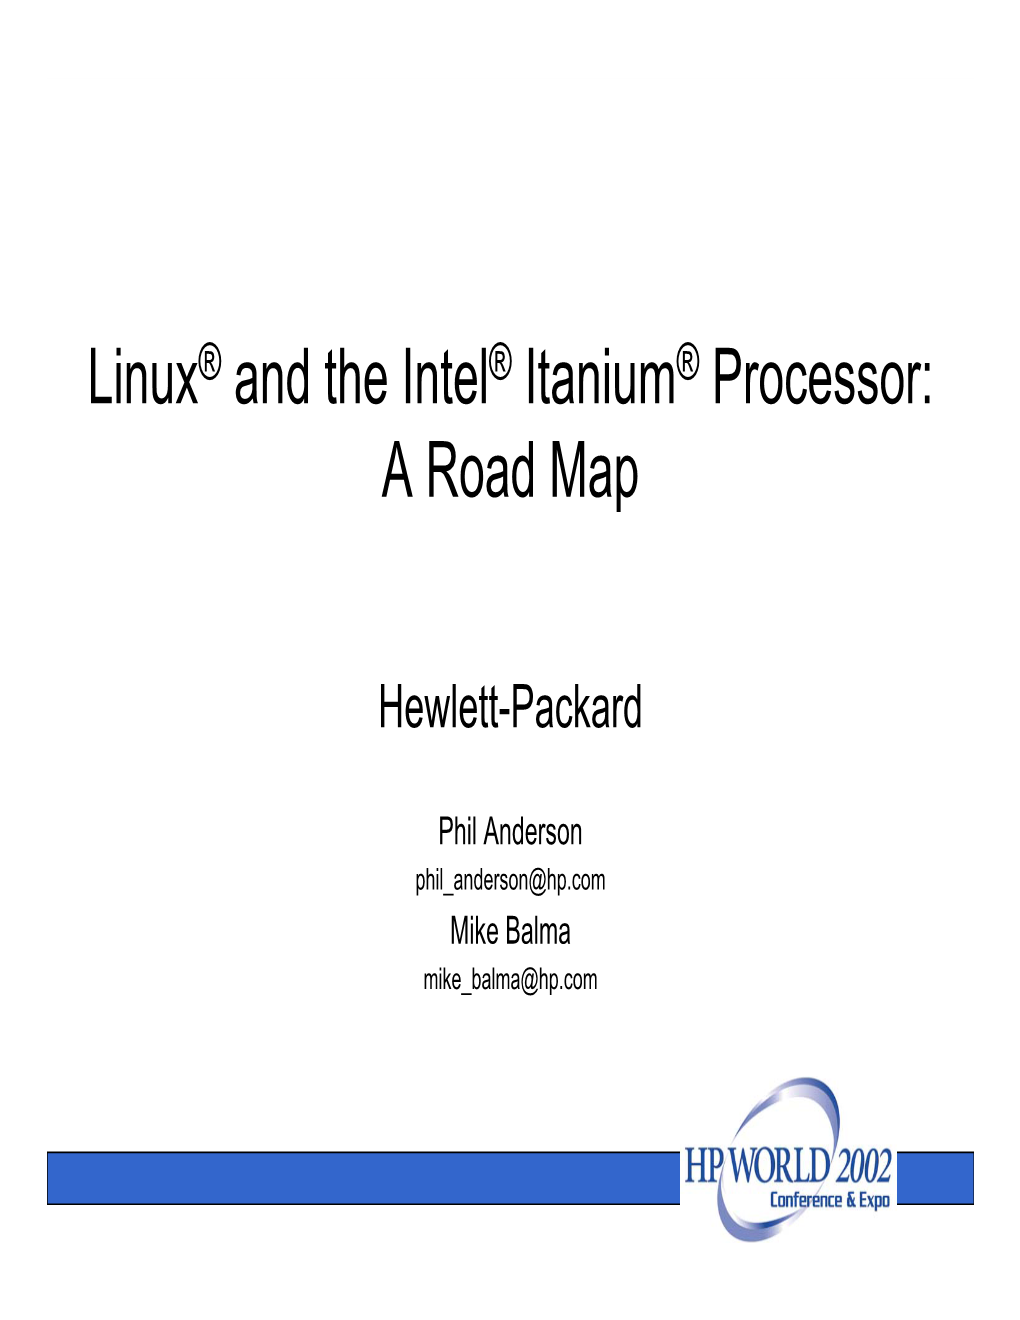 Linux® and the Intel® Itanium® Processor: a Road Map